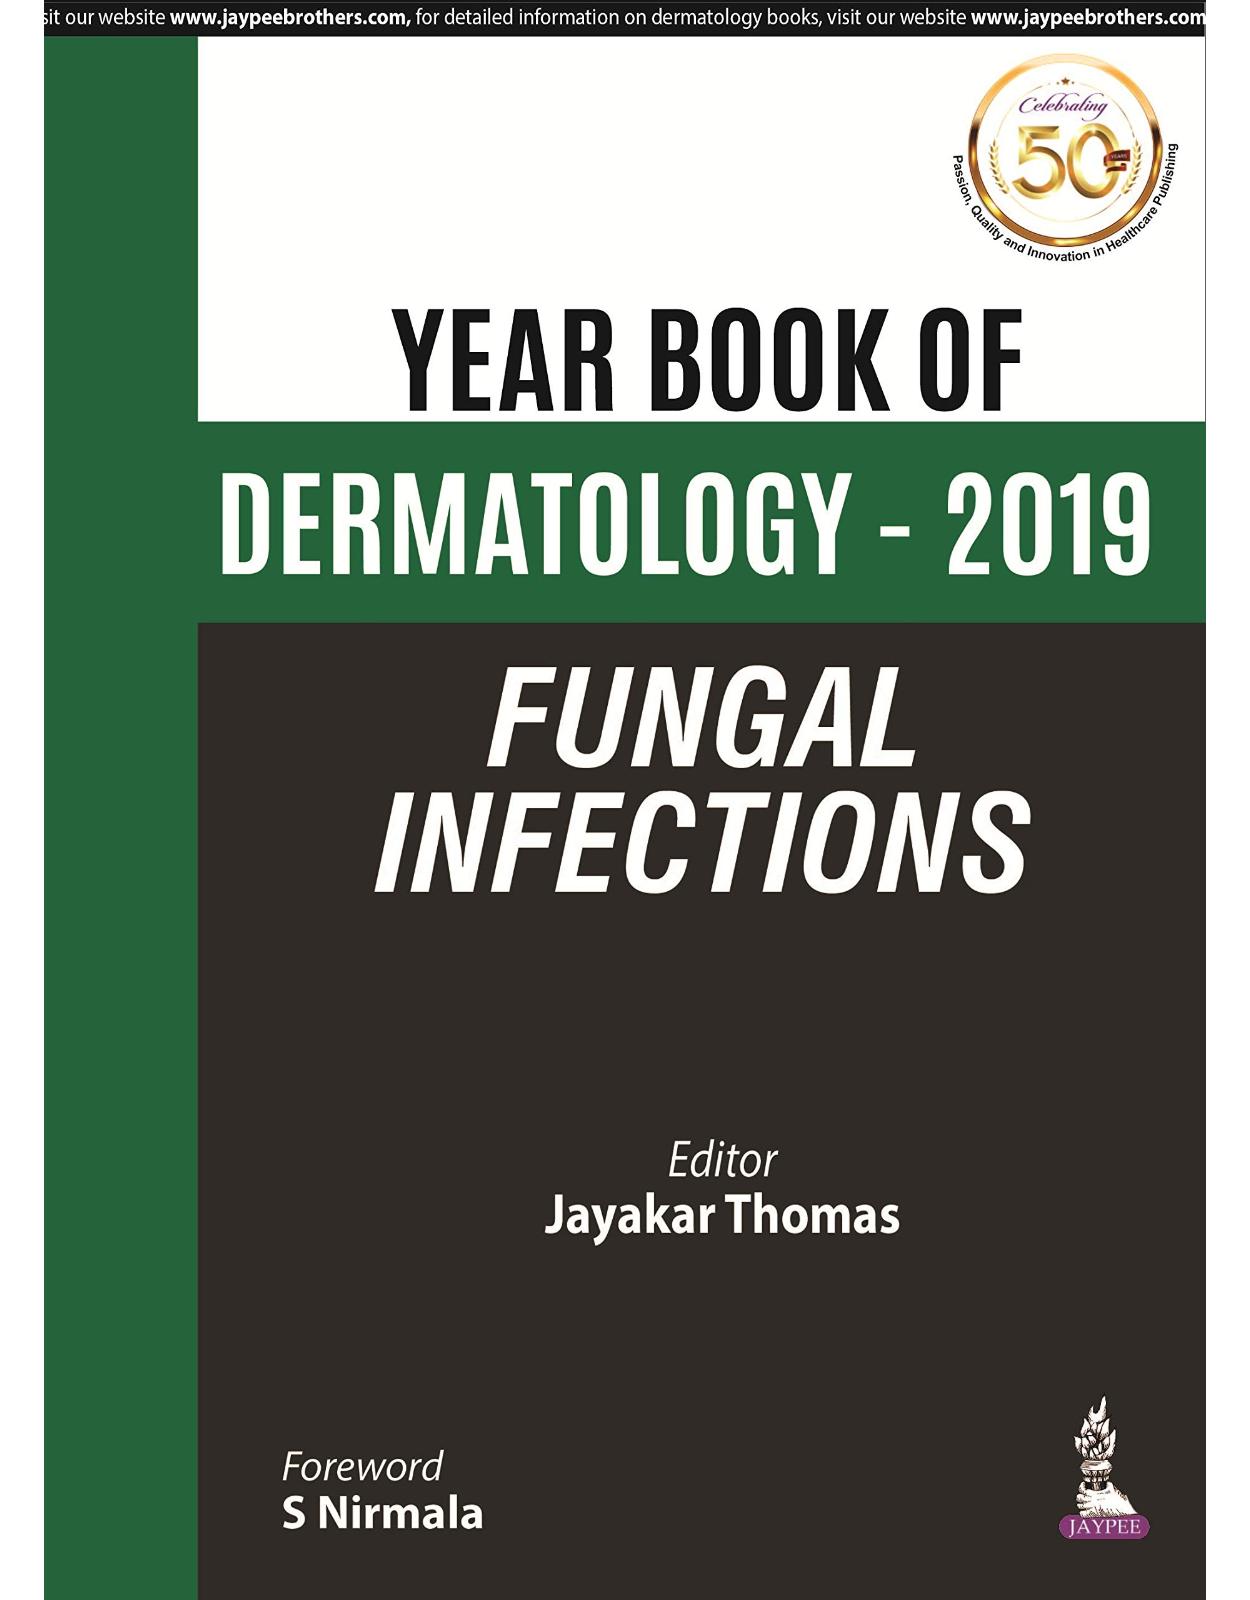 Year Book of Dermatology - 2019 Fungal Infections